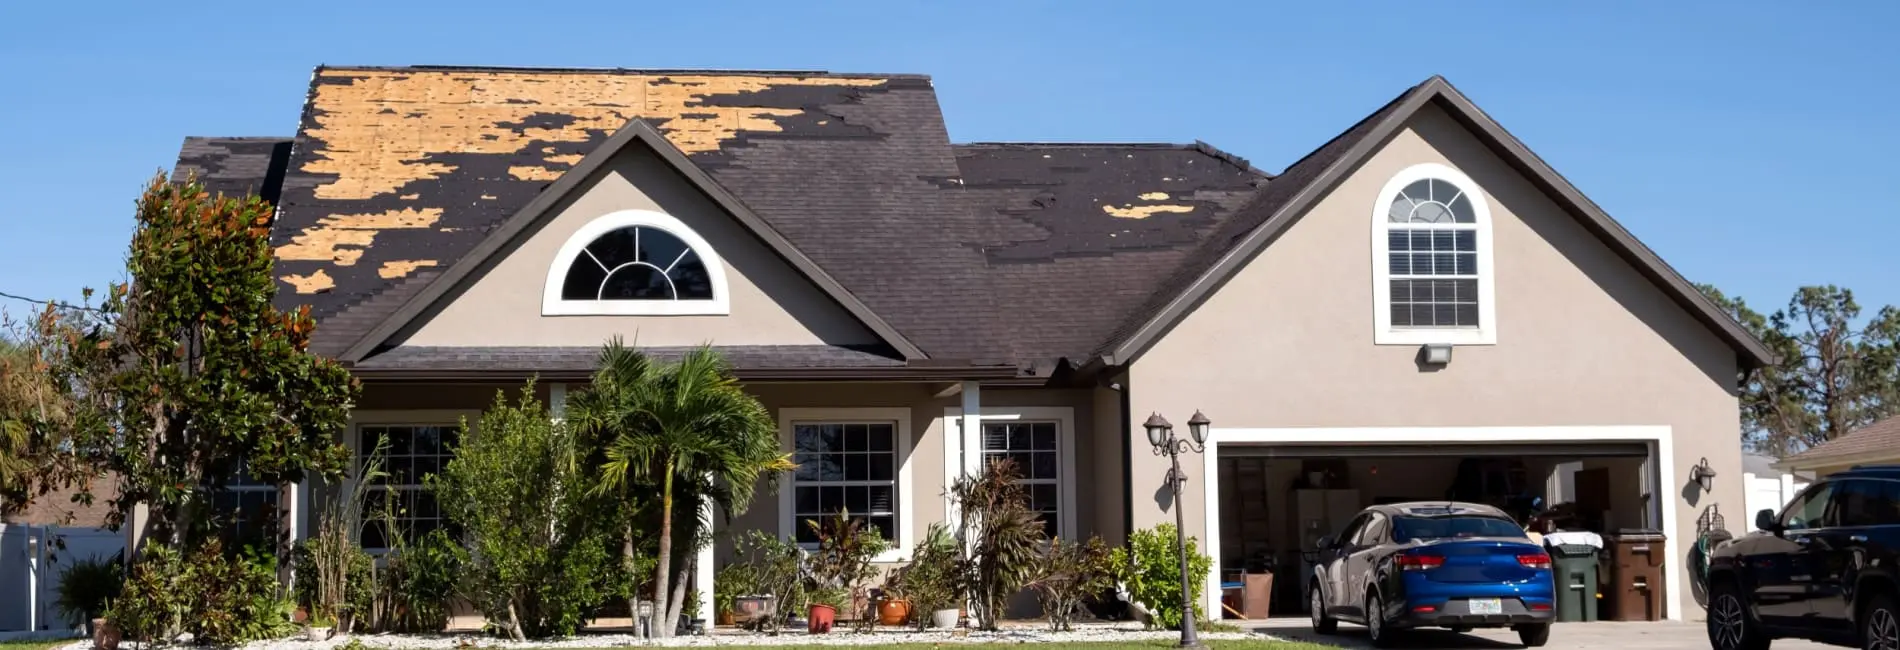 Common Signs of Roof Damage and How to Address Them